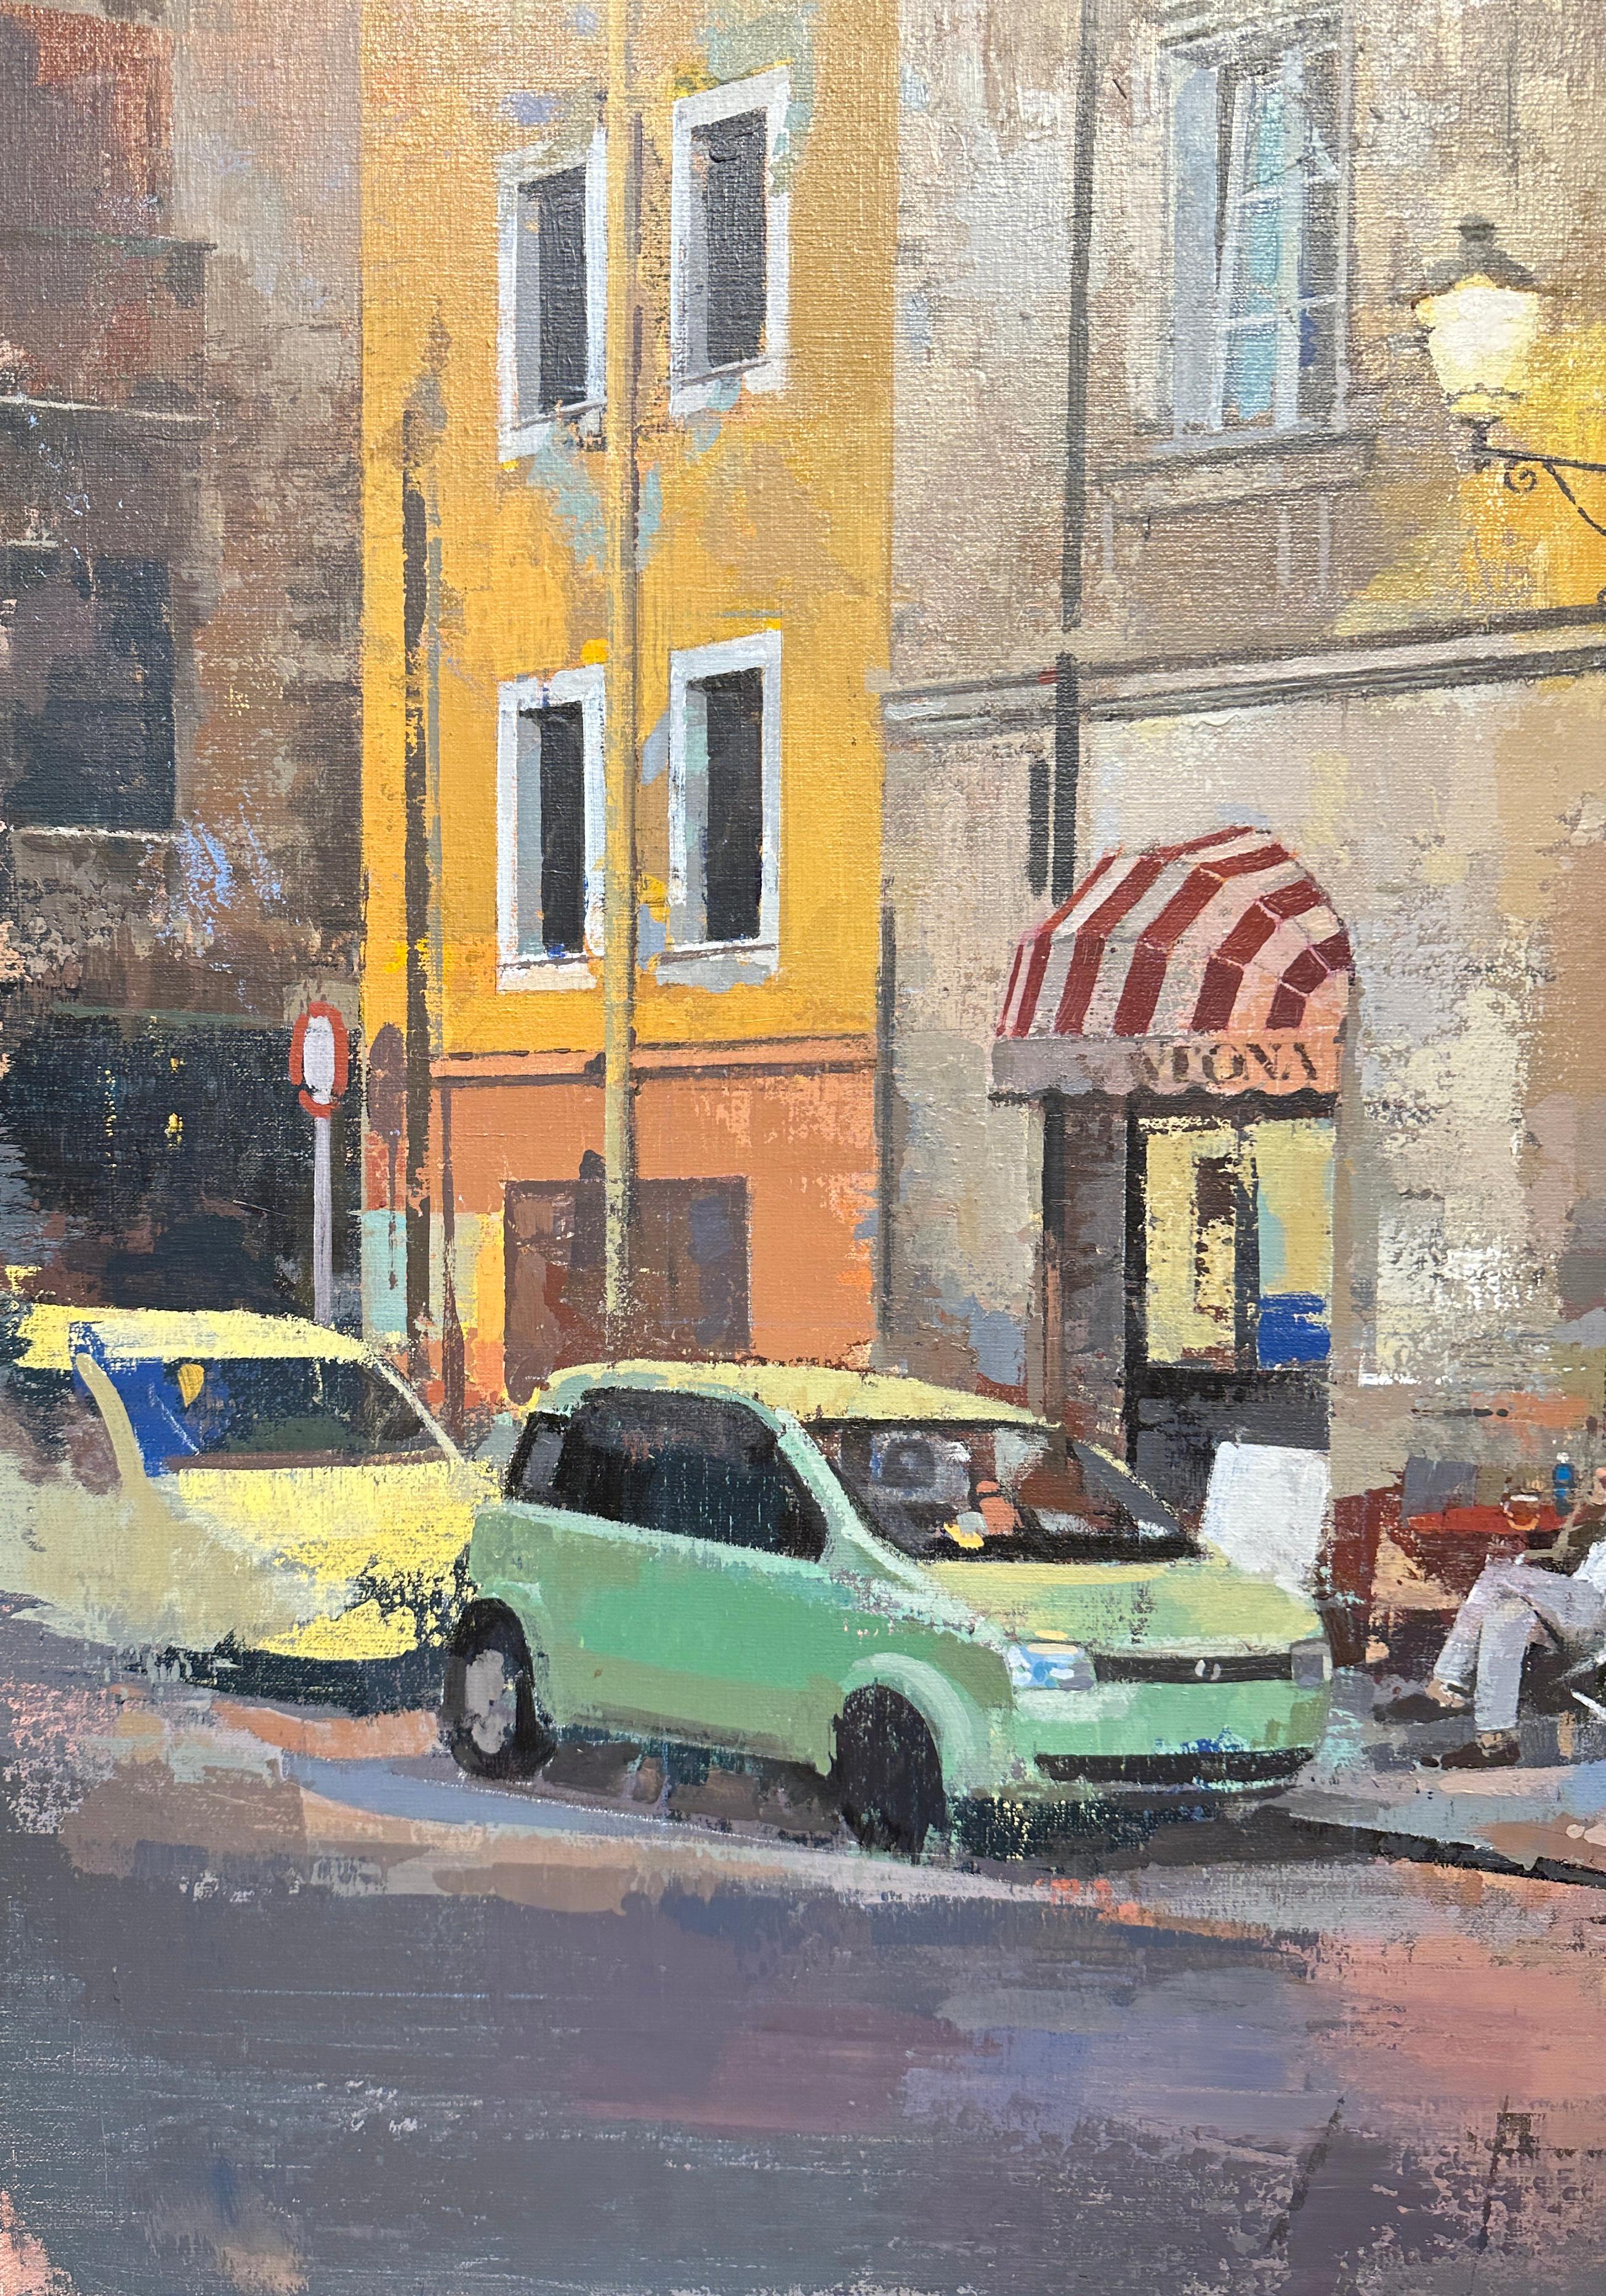 Time stands still in the Piazza Tola. For a brief second the hustle and bustle of urban life has quieted to the tranquil simplicity of a this urban scene. Ogawa adds swaths of soft color in loose brushwork to quiet the scene even further. The piece